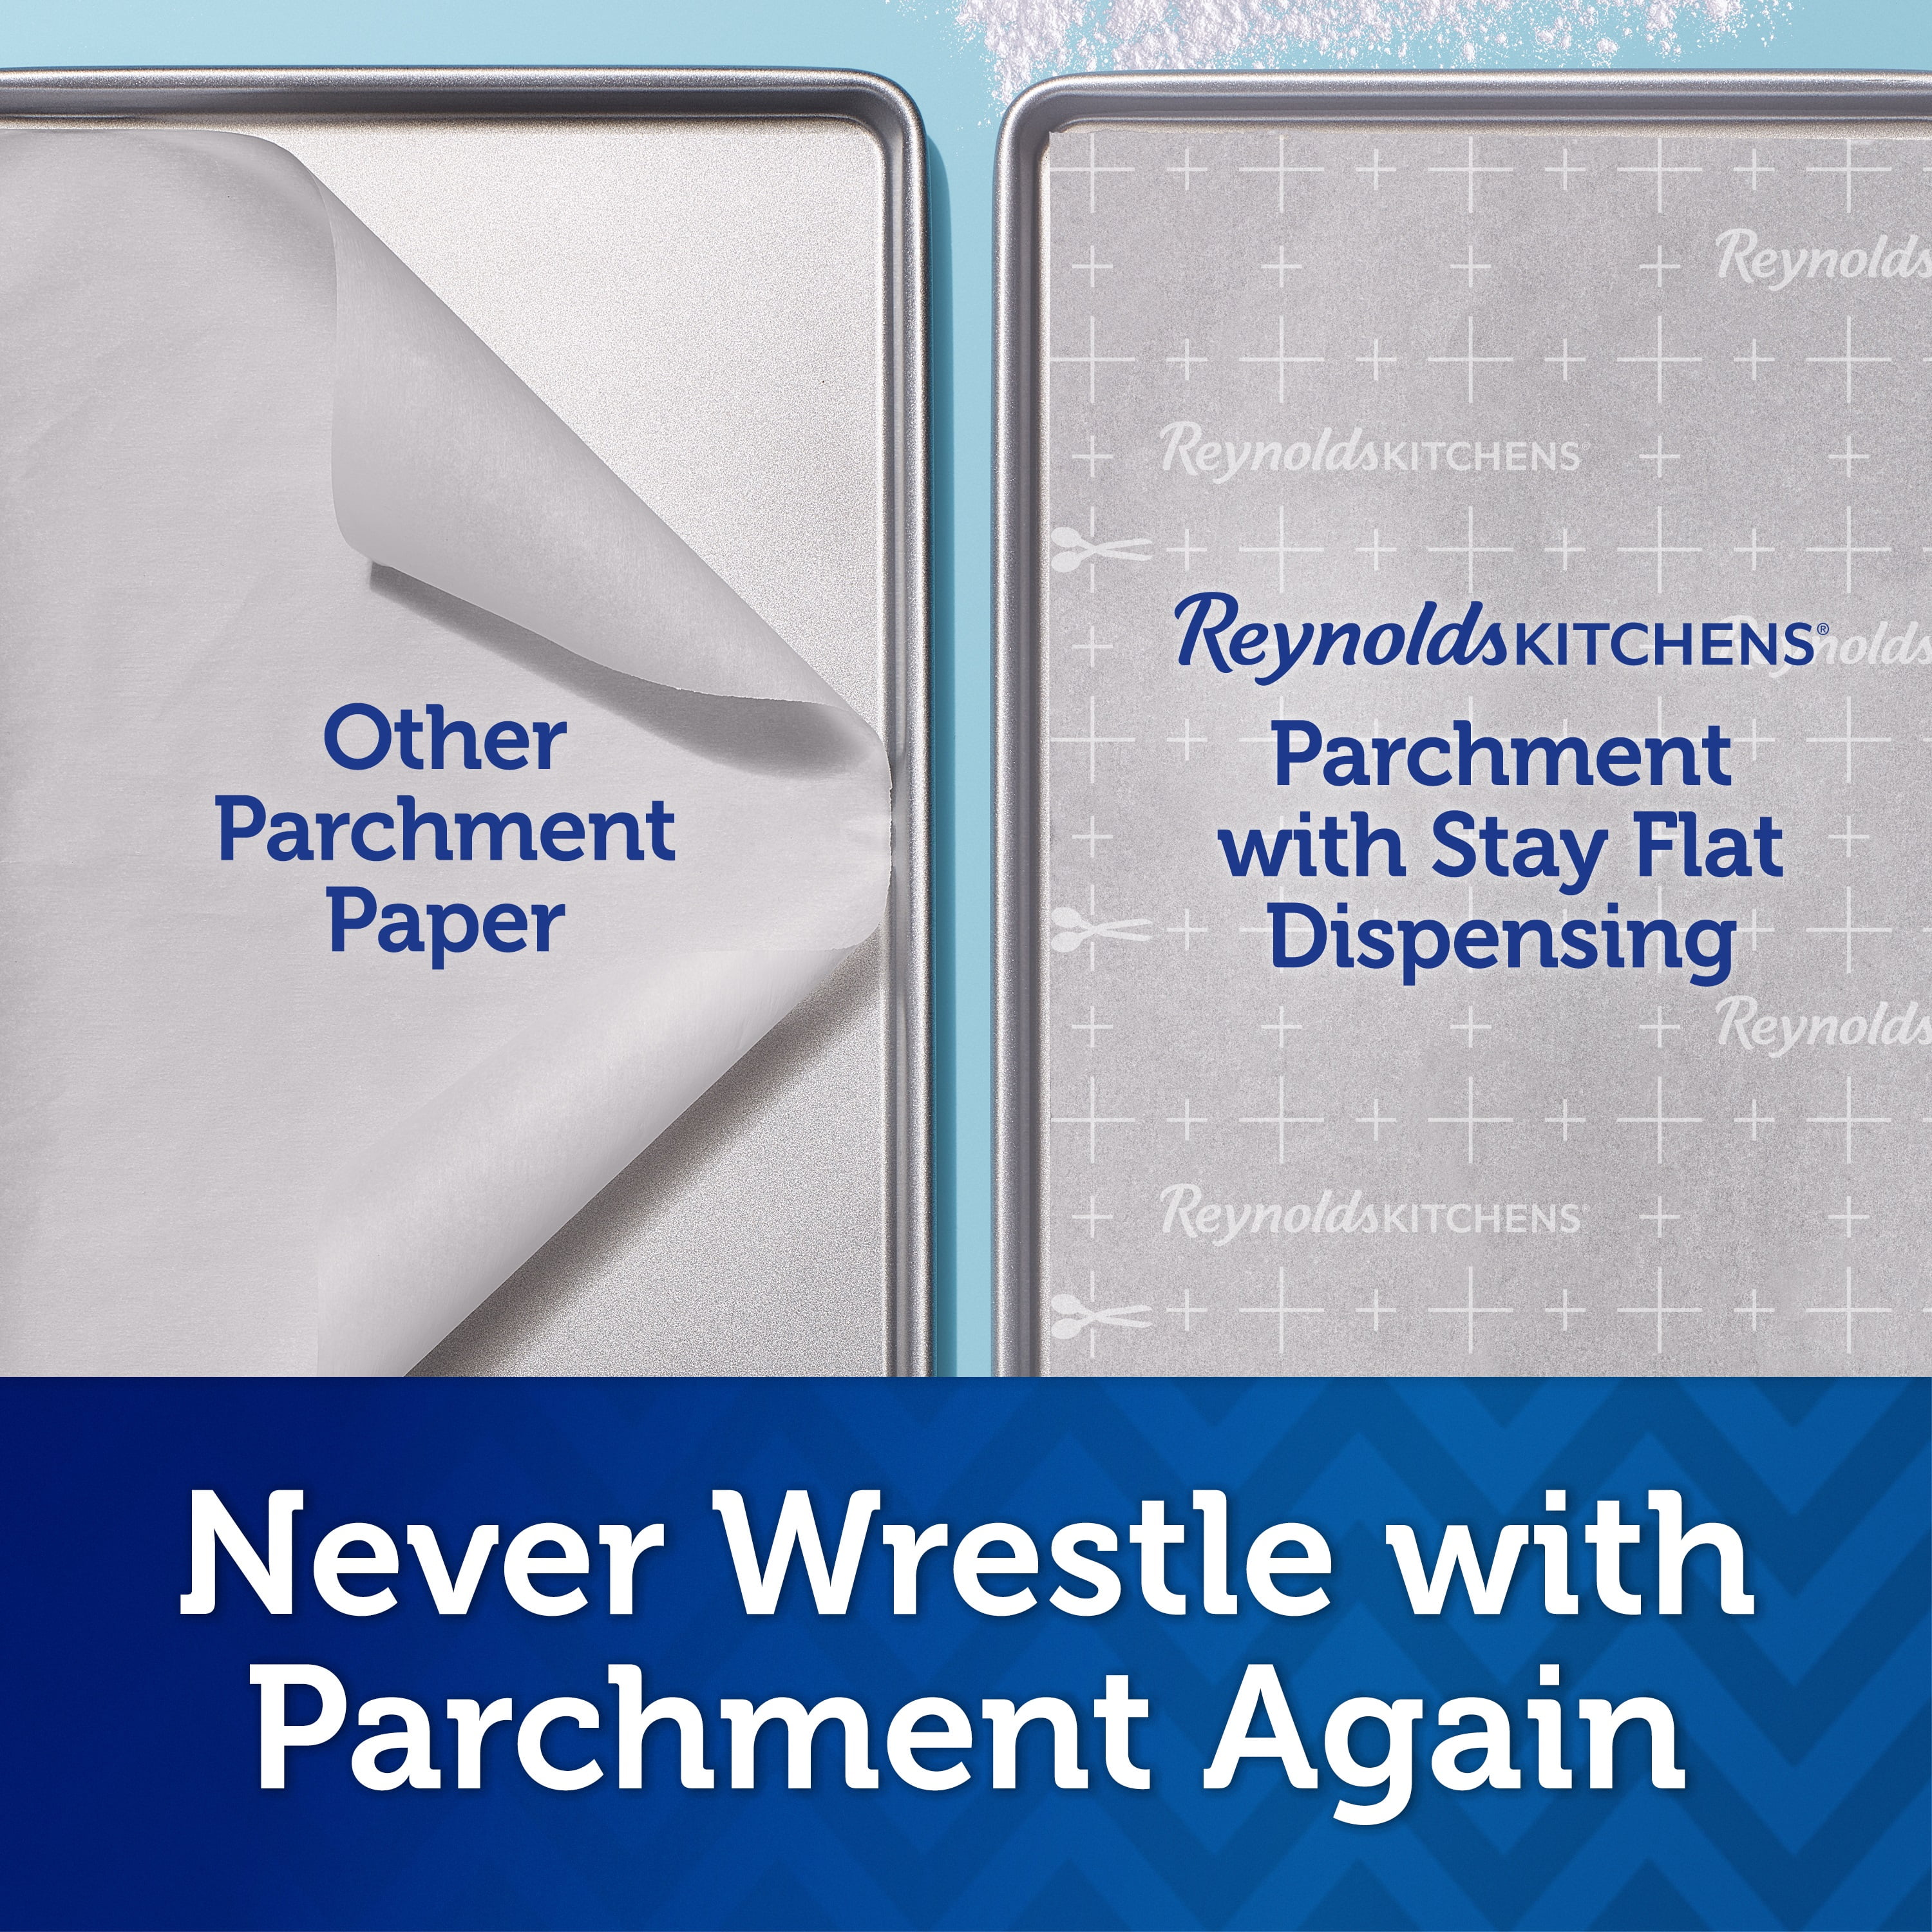 Reynolds Kitchens Pop-Up Parchment Paper Sheets, Norway